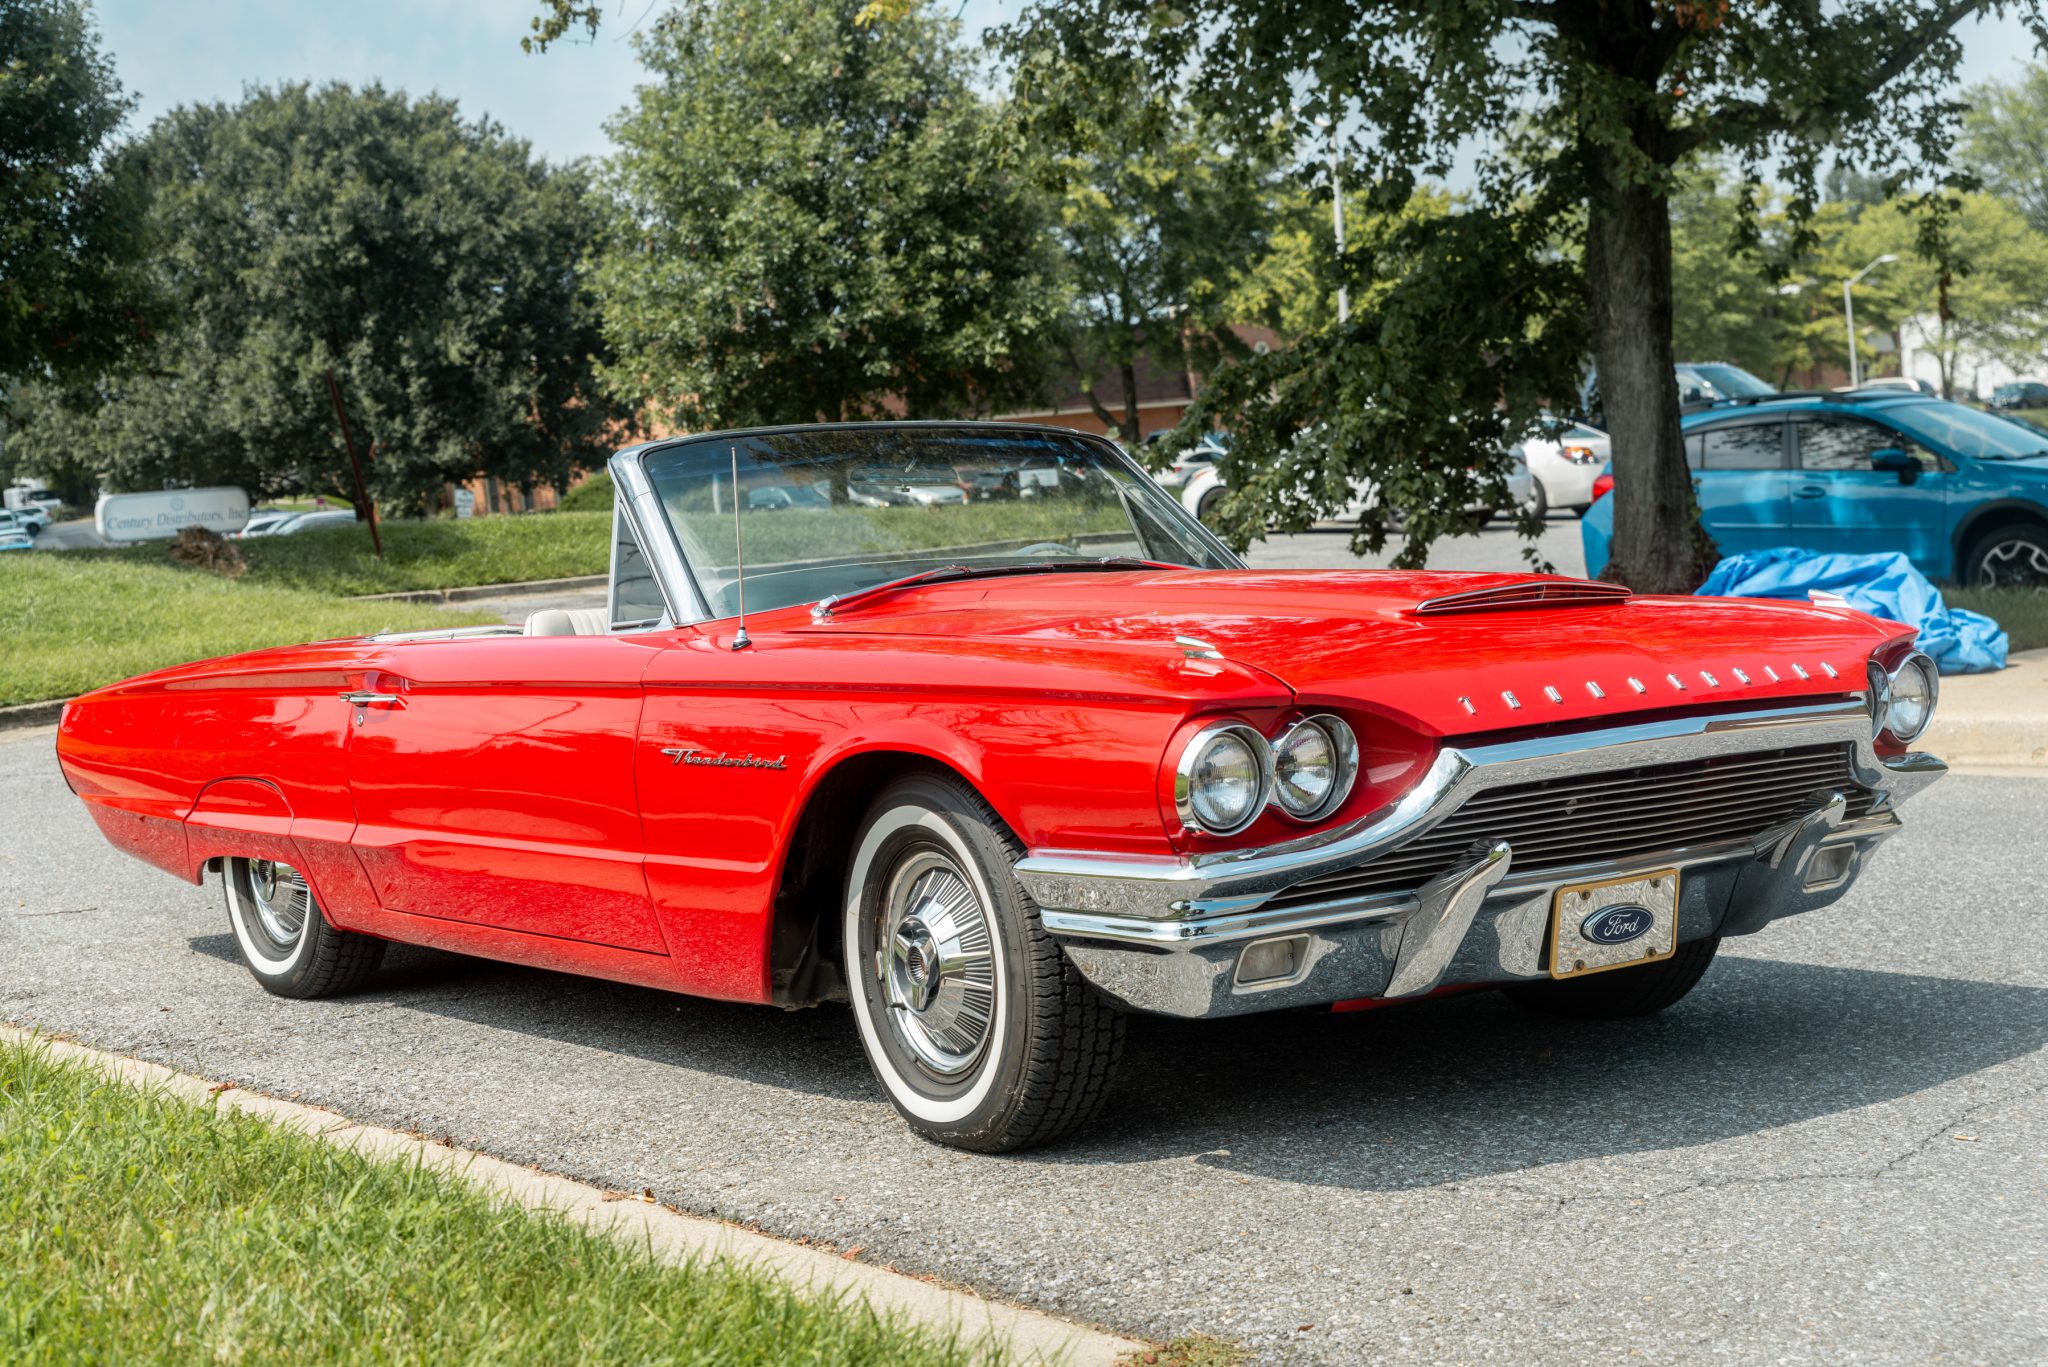 1964 Red Ford Thunderbird Convertible Driver's Side View